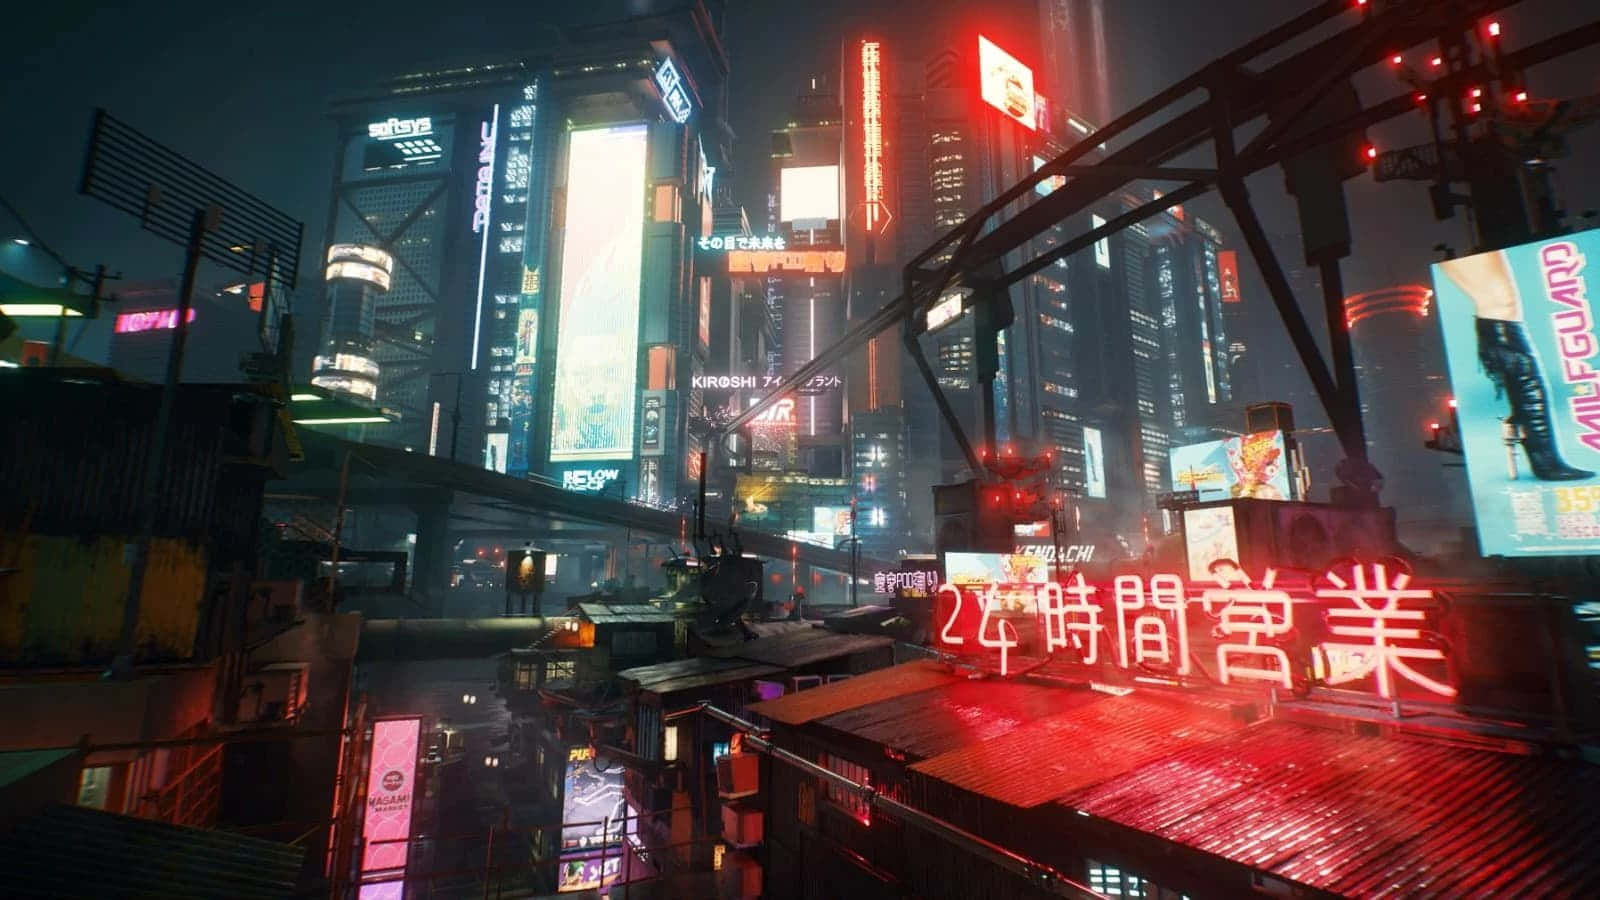 Step up your technological game with this cyberpunk laptop Wallpaper